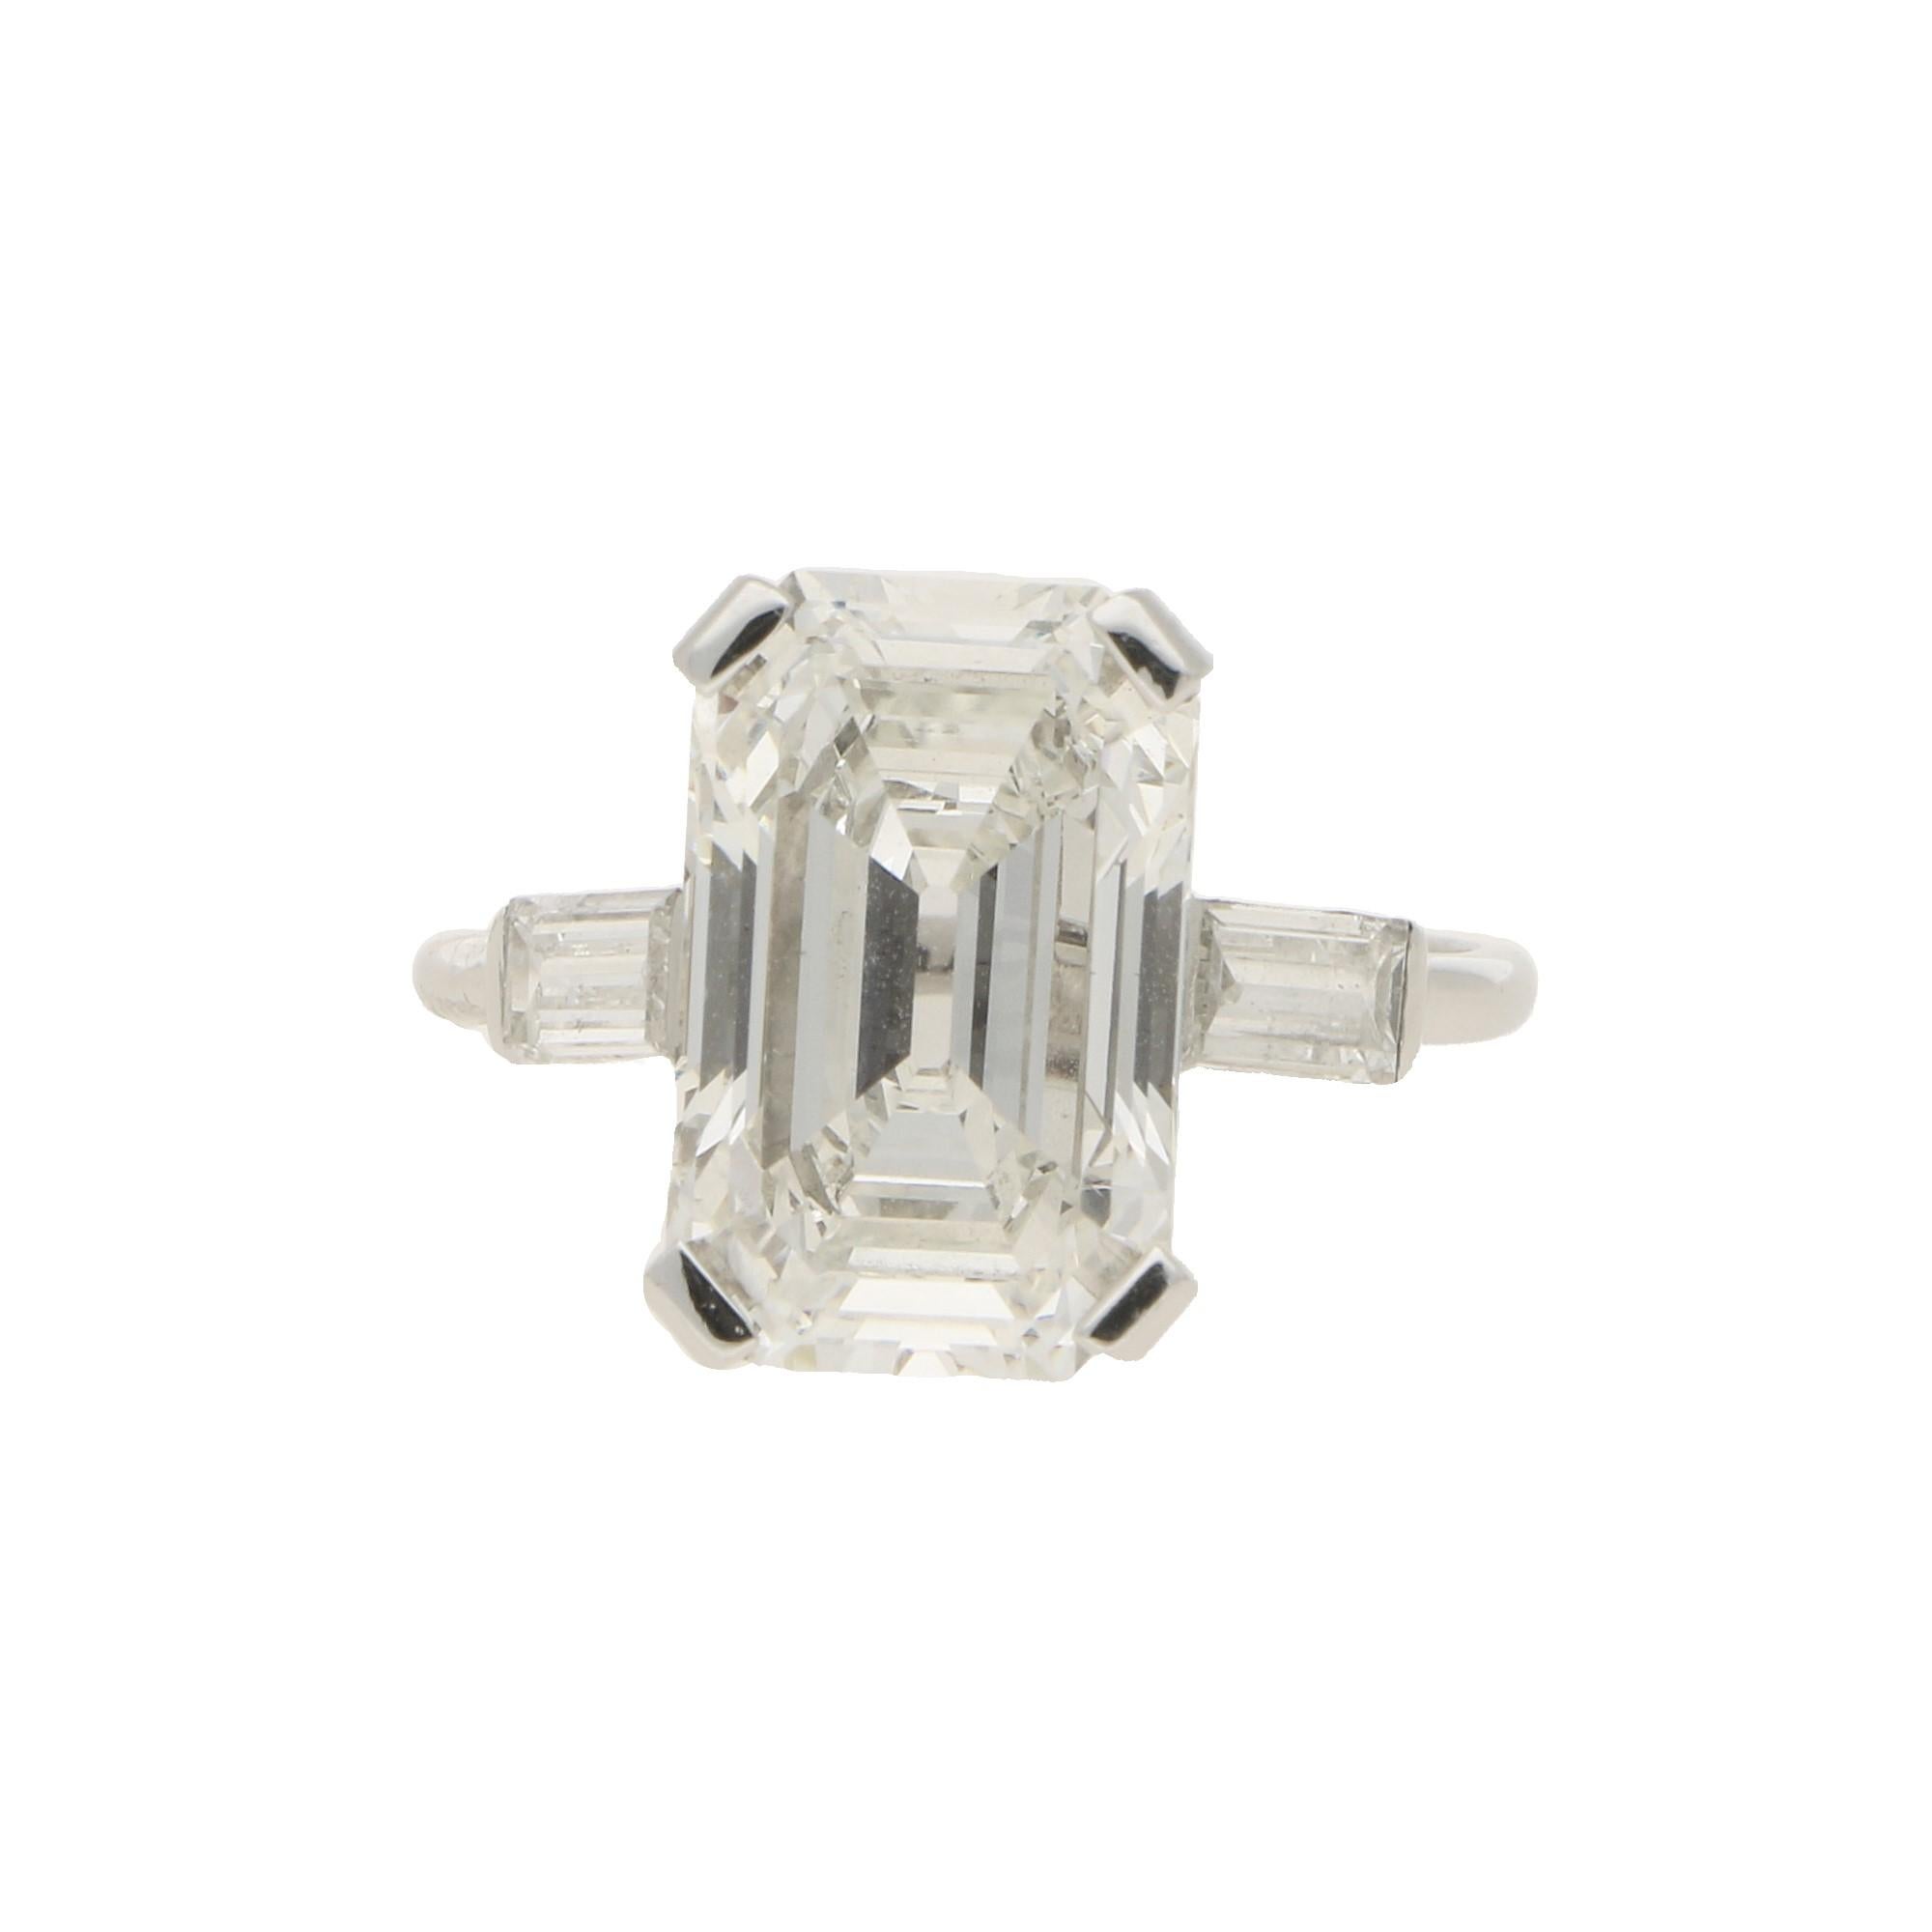 A simply beautiful Art Deco Style cut cornered rectangular step cut diamond engagement ring, set in platinum. This stunning central stone is GIA certified as a 3.75 carat diamond, assessed as F colour and VVS2 clarity - spectacular specifications